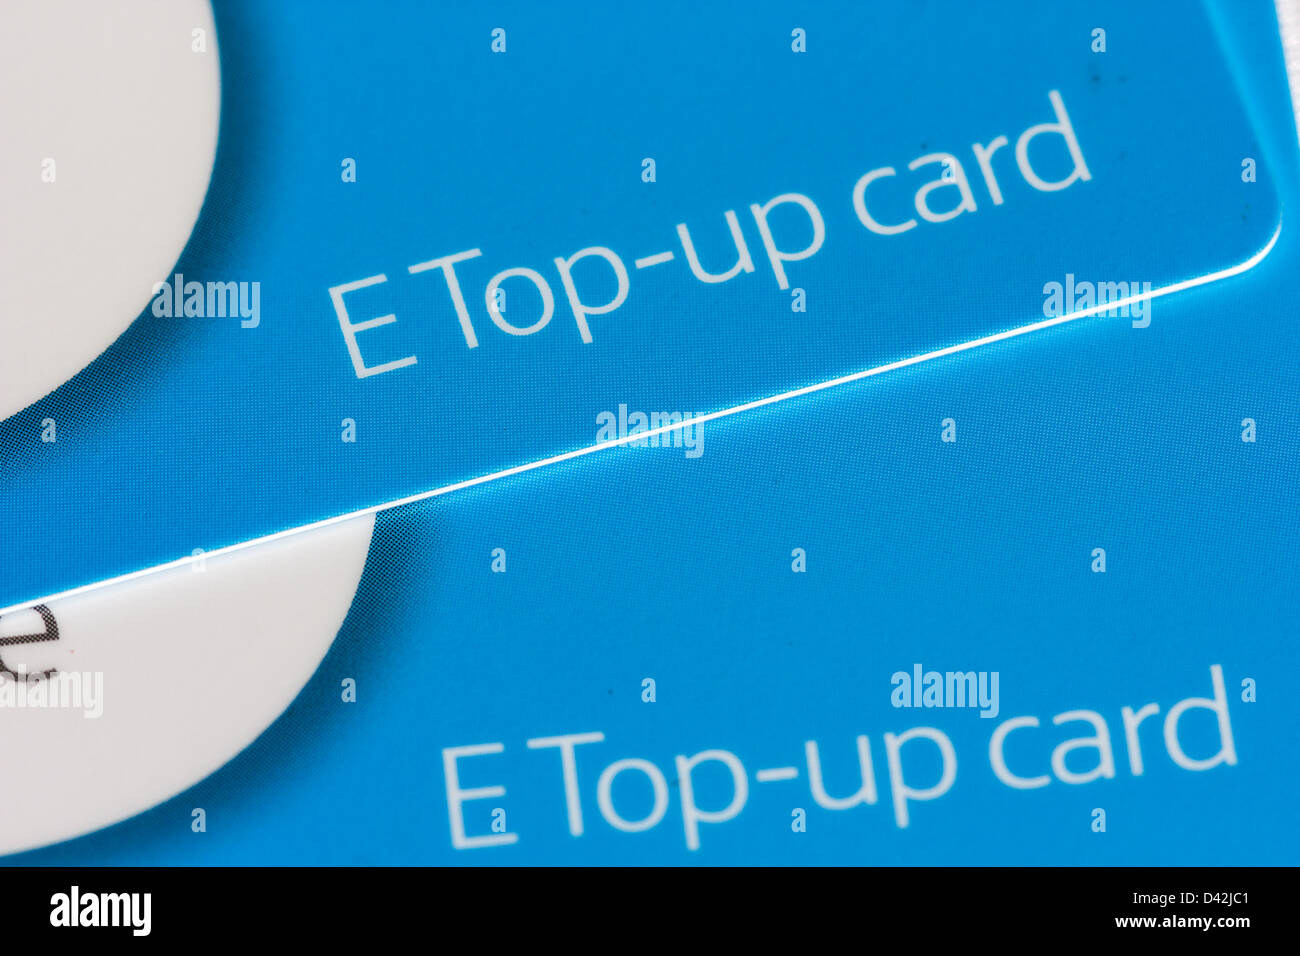 Mobile phones top up cards. UK Stock Photo - Alamy